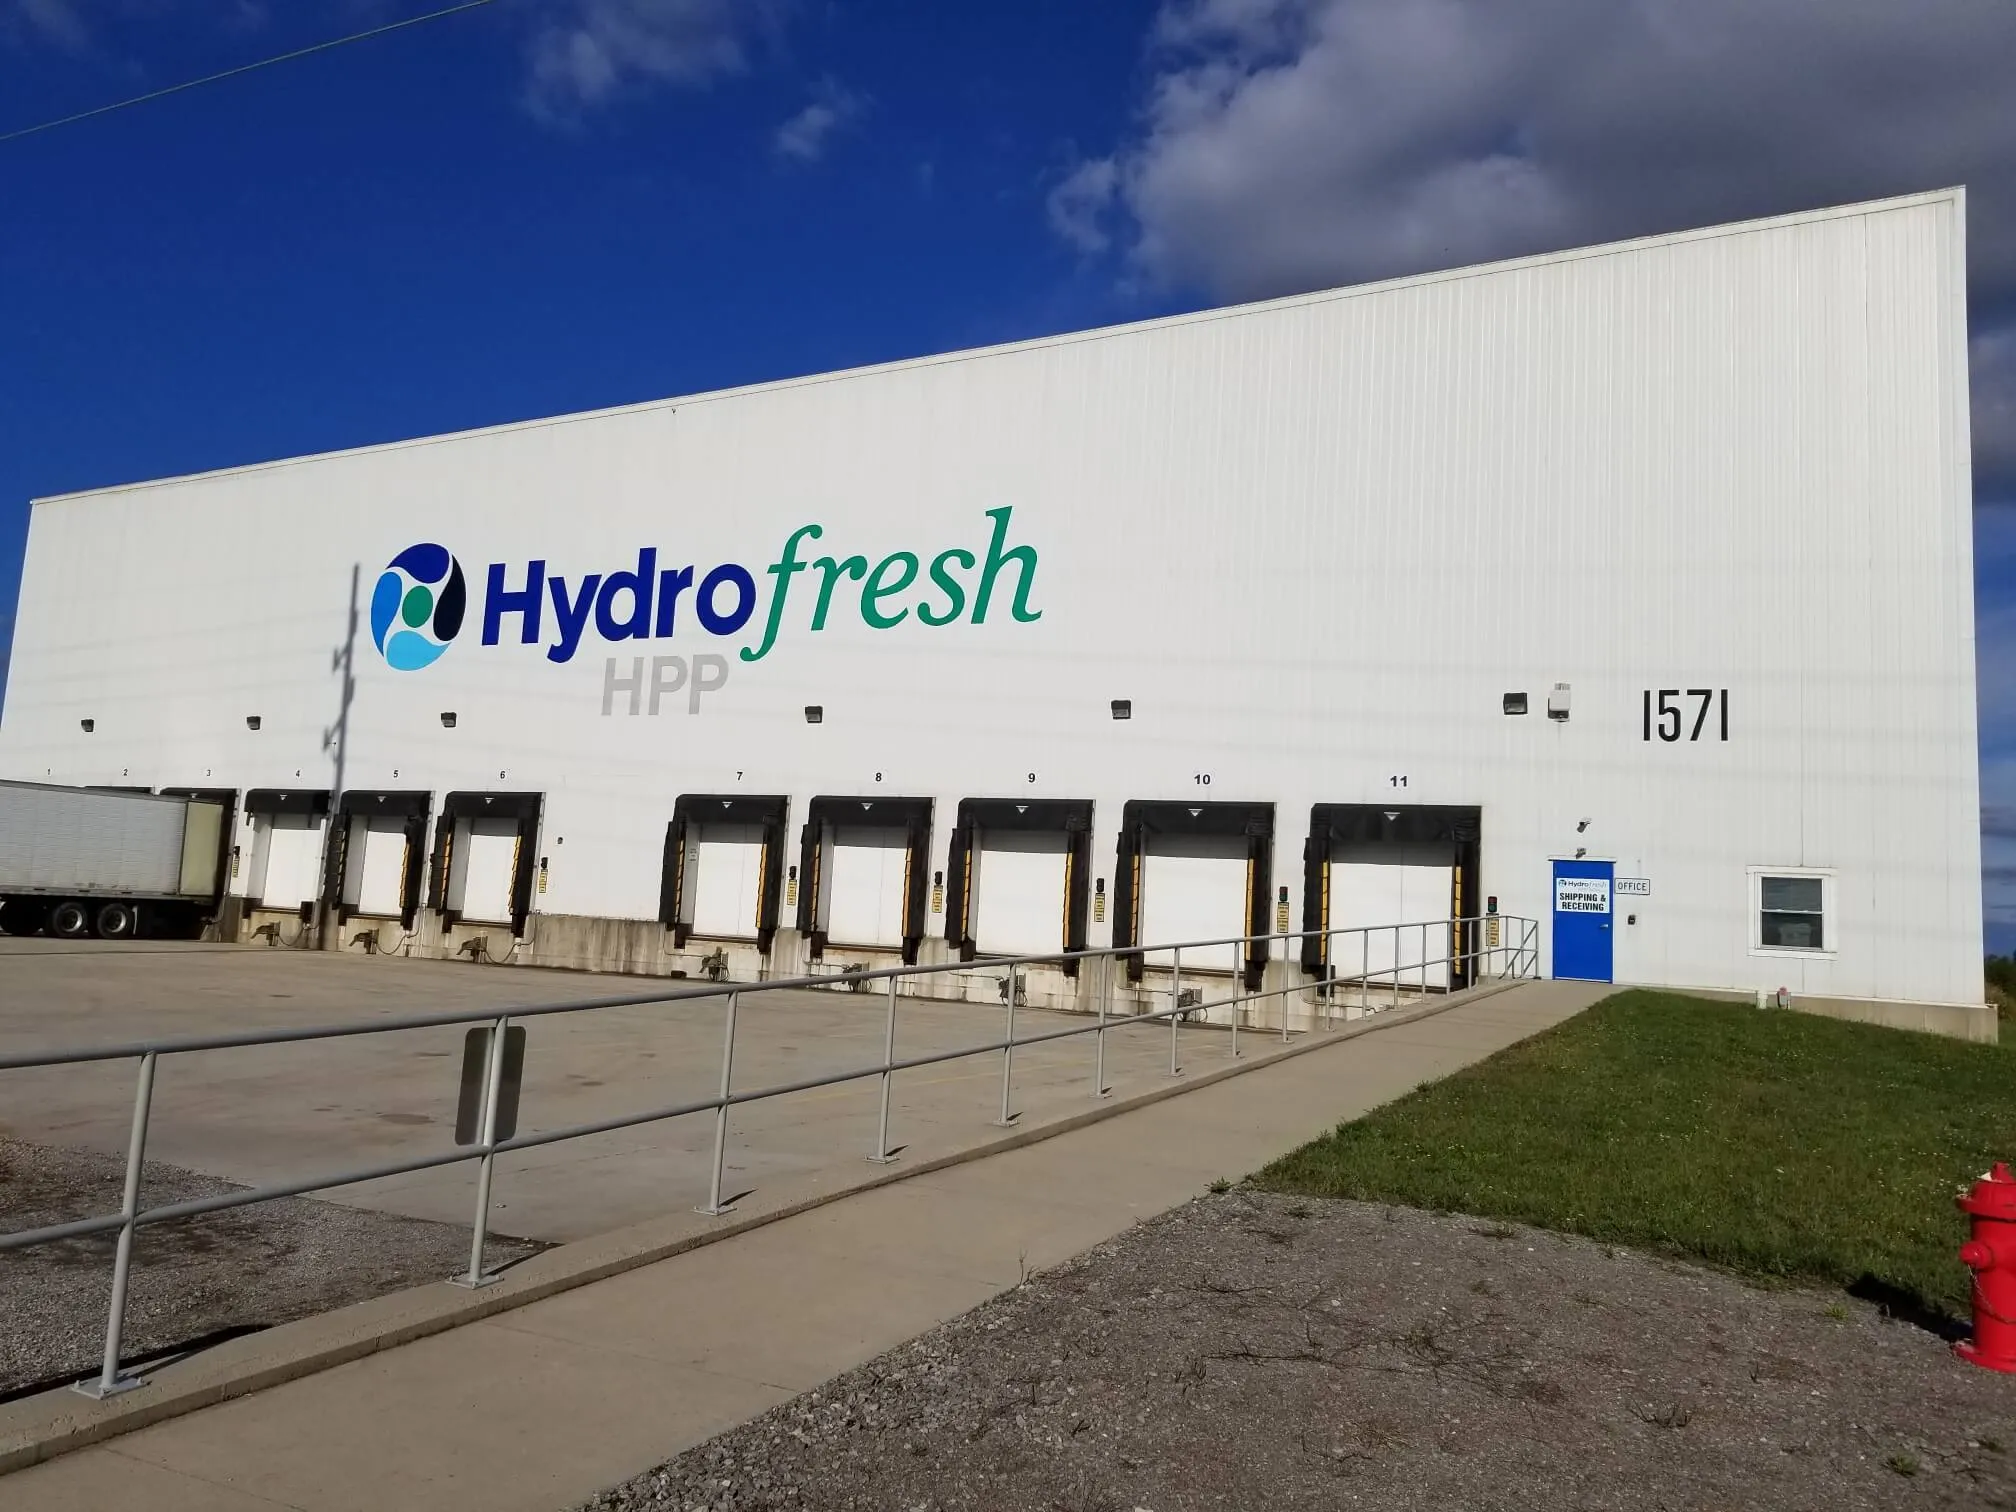 HydroFresh shipping and receiving building from the outside